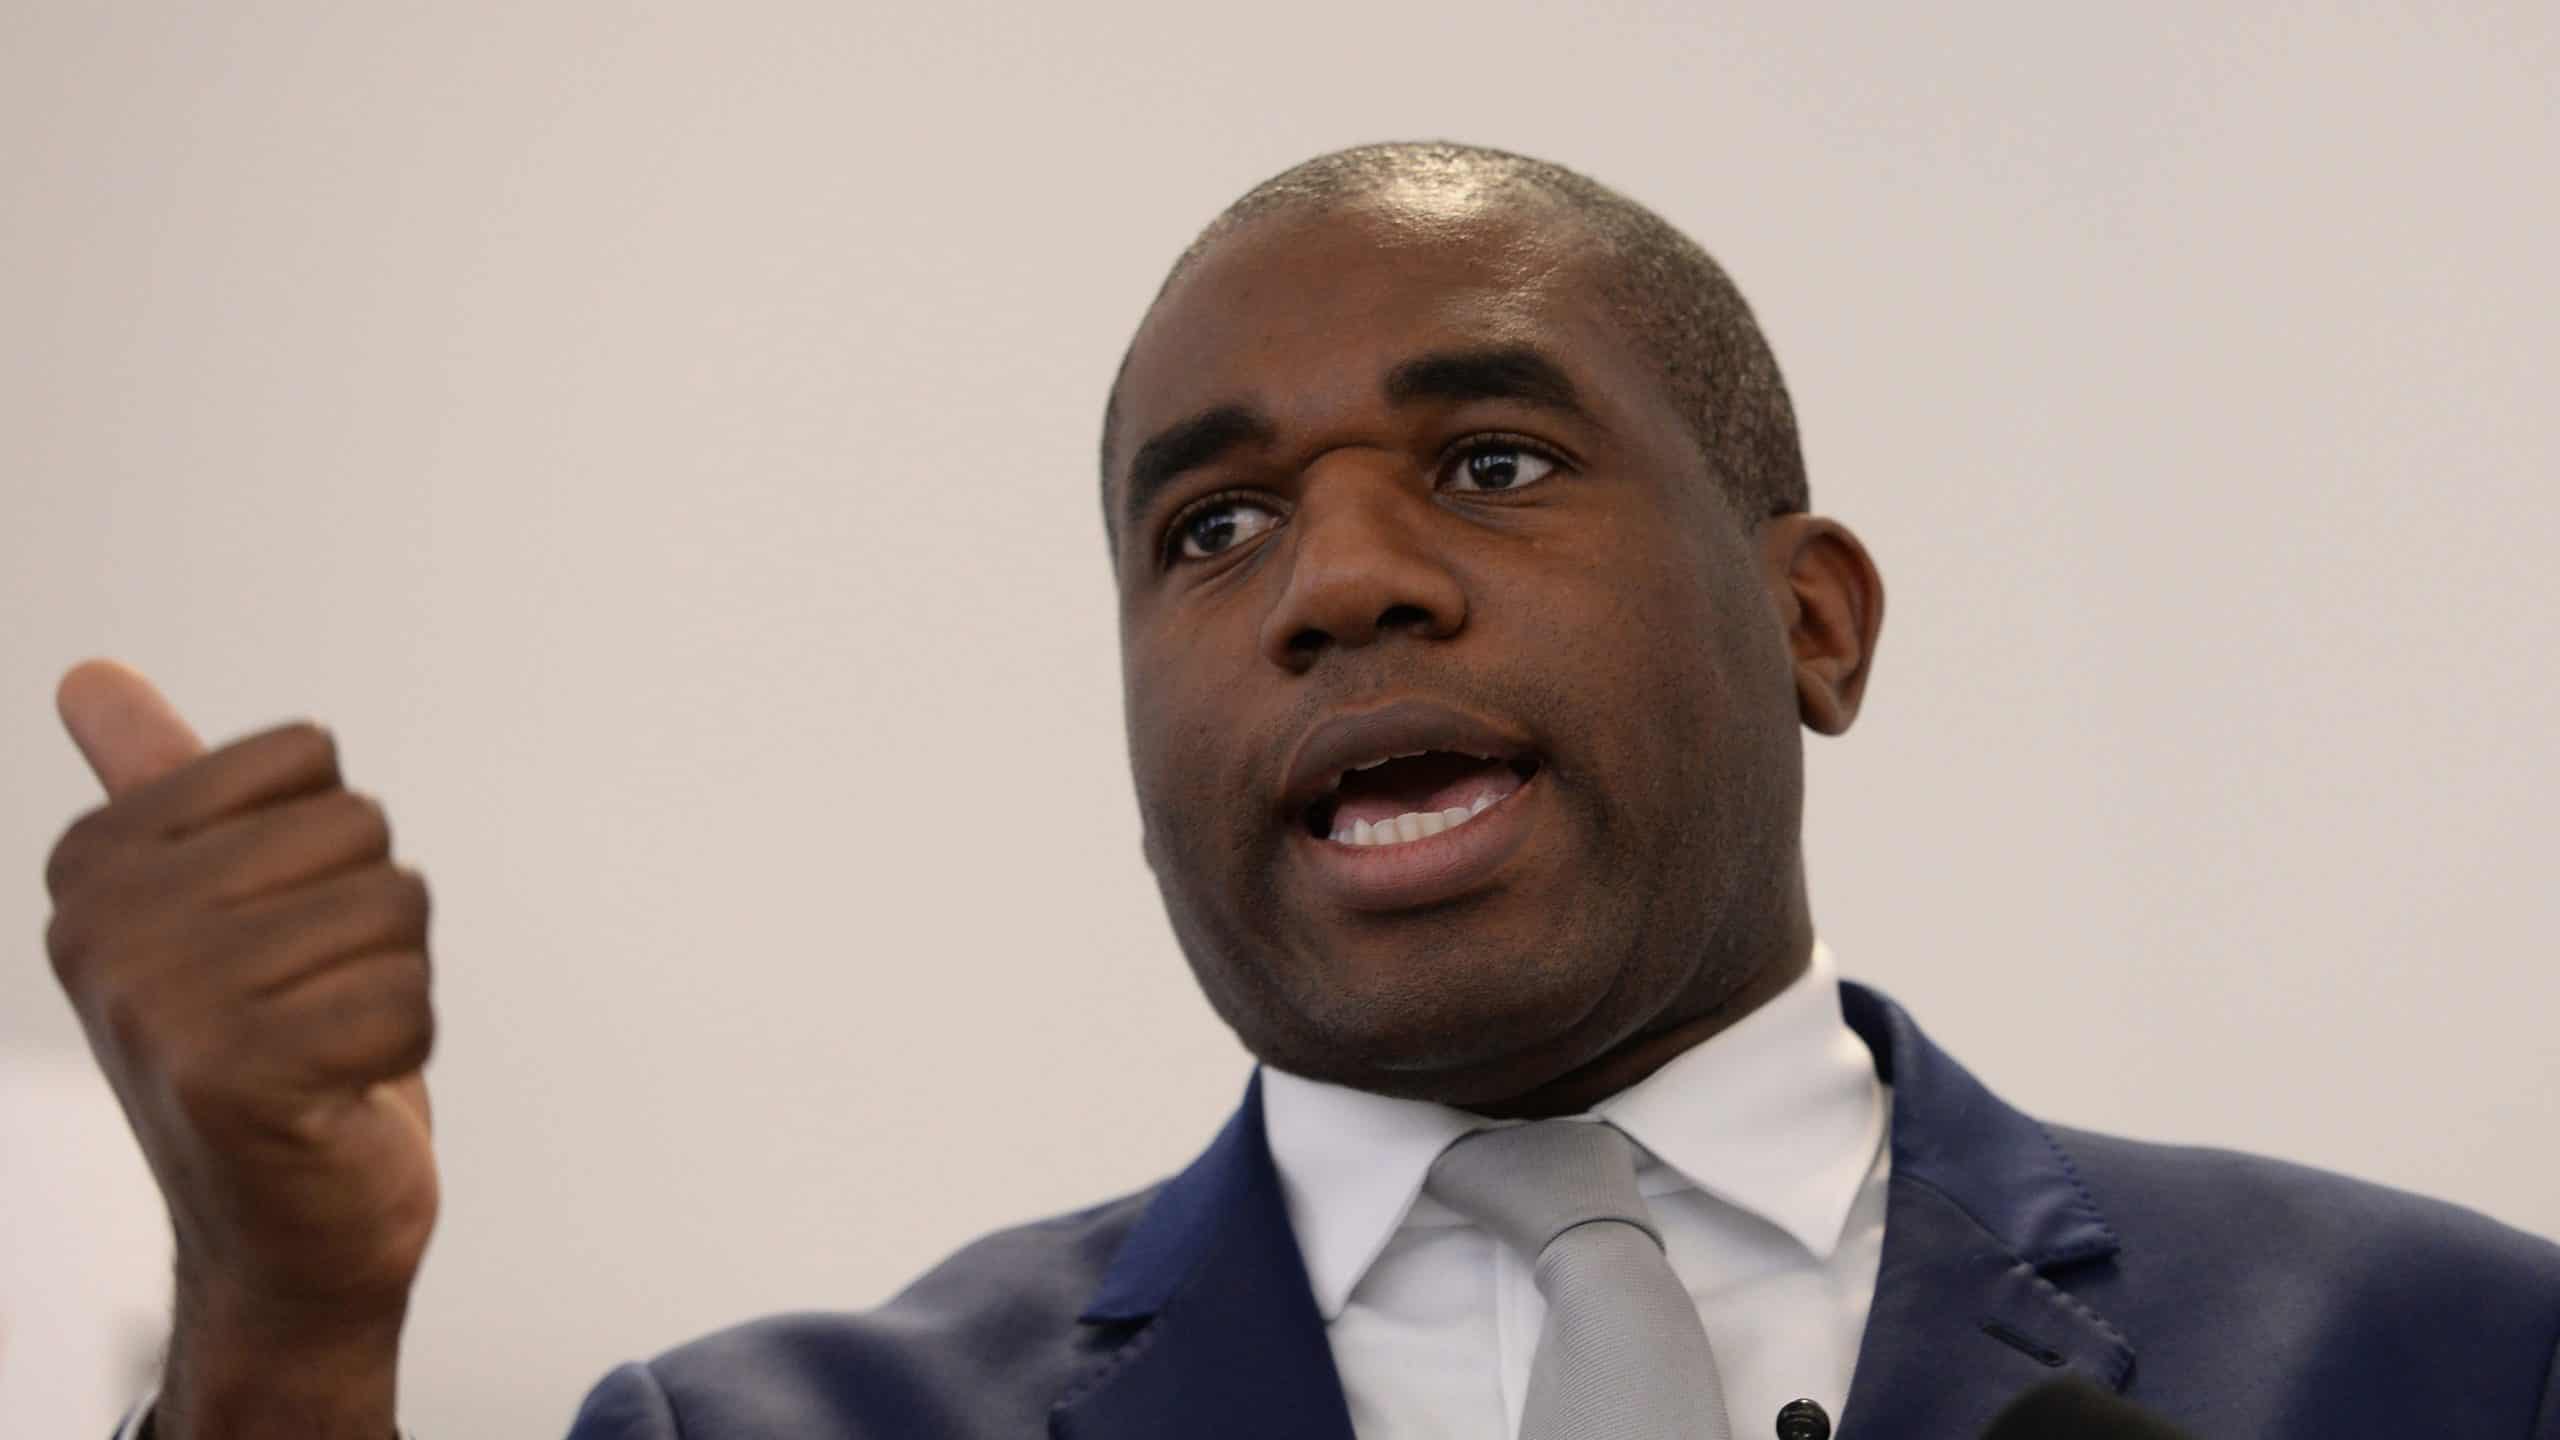 Amazon removes listing for shoes described as “n***** brown” after complaint from David Lammy